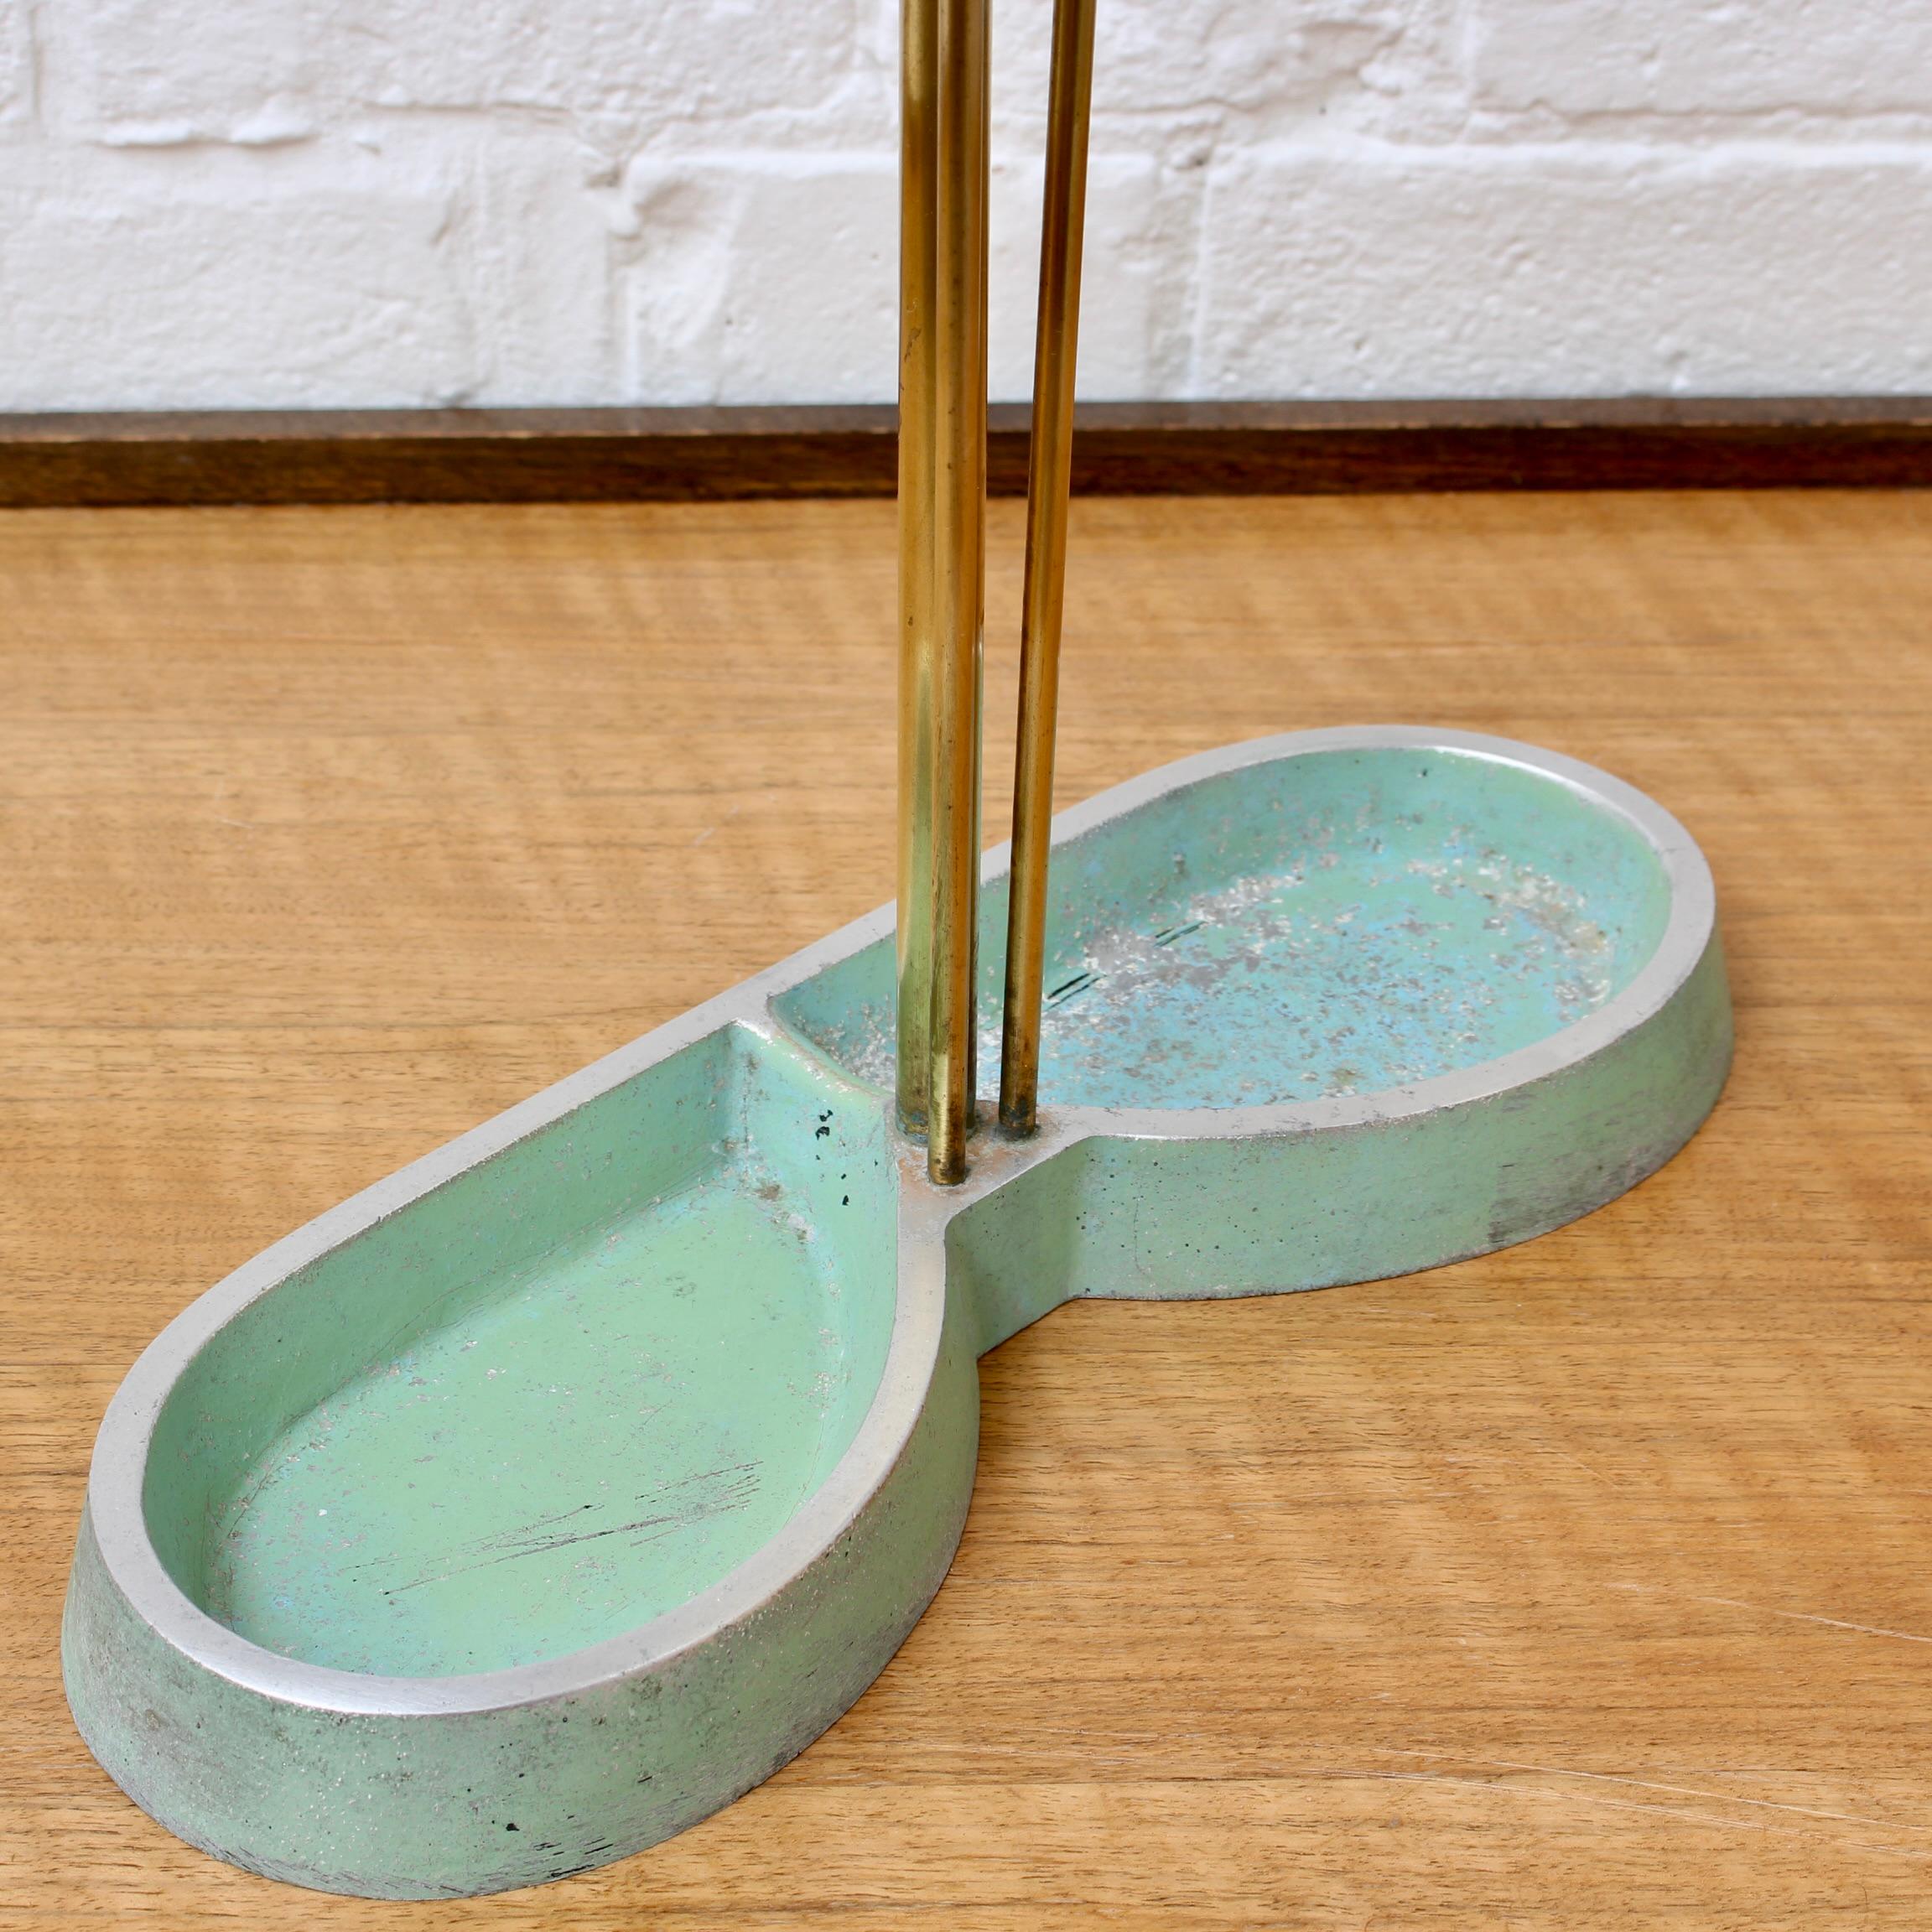 Aluminum Midcentury Modern Brass Umbrella Stand Attributed to Artes H&H Seefried Steppach For Sale